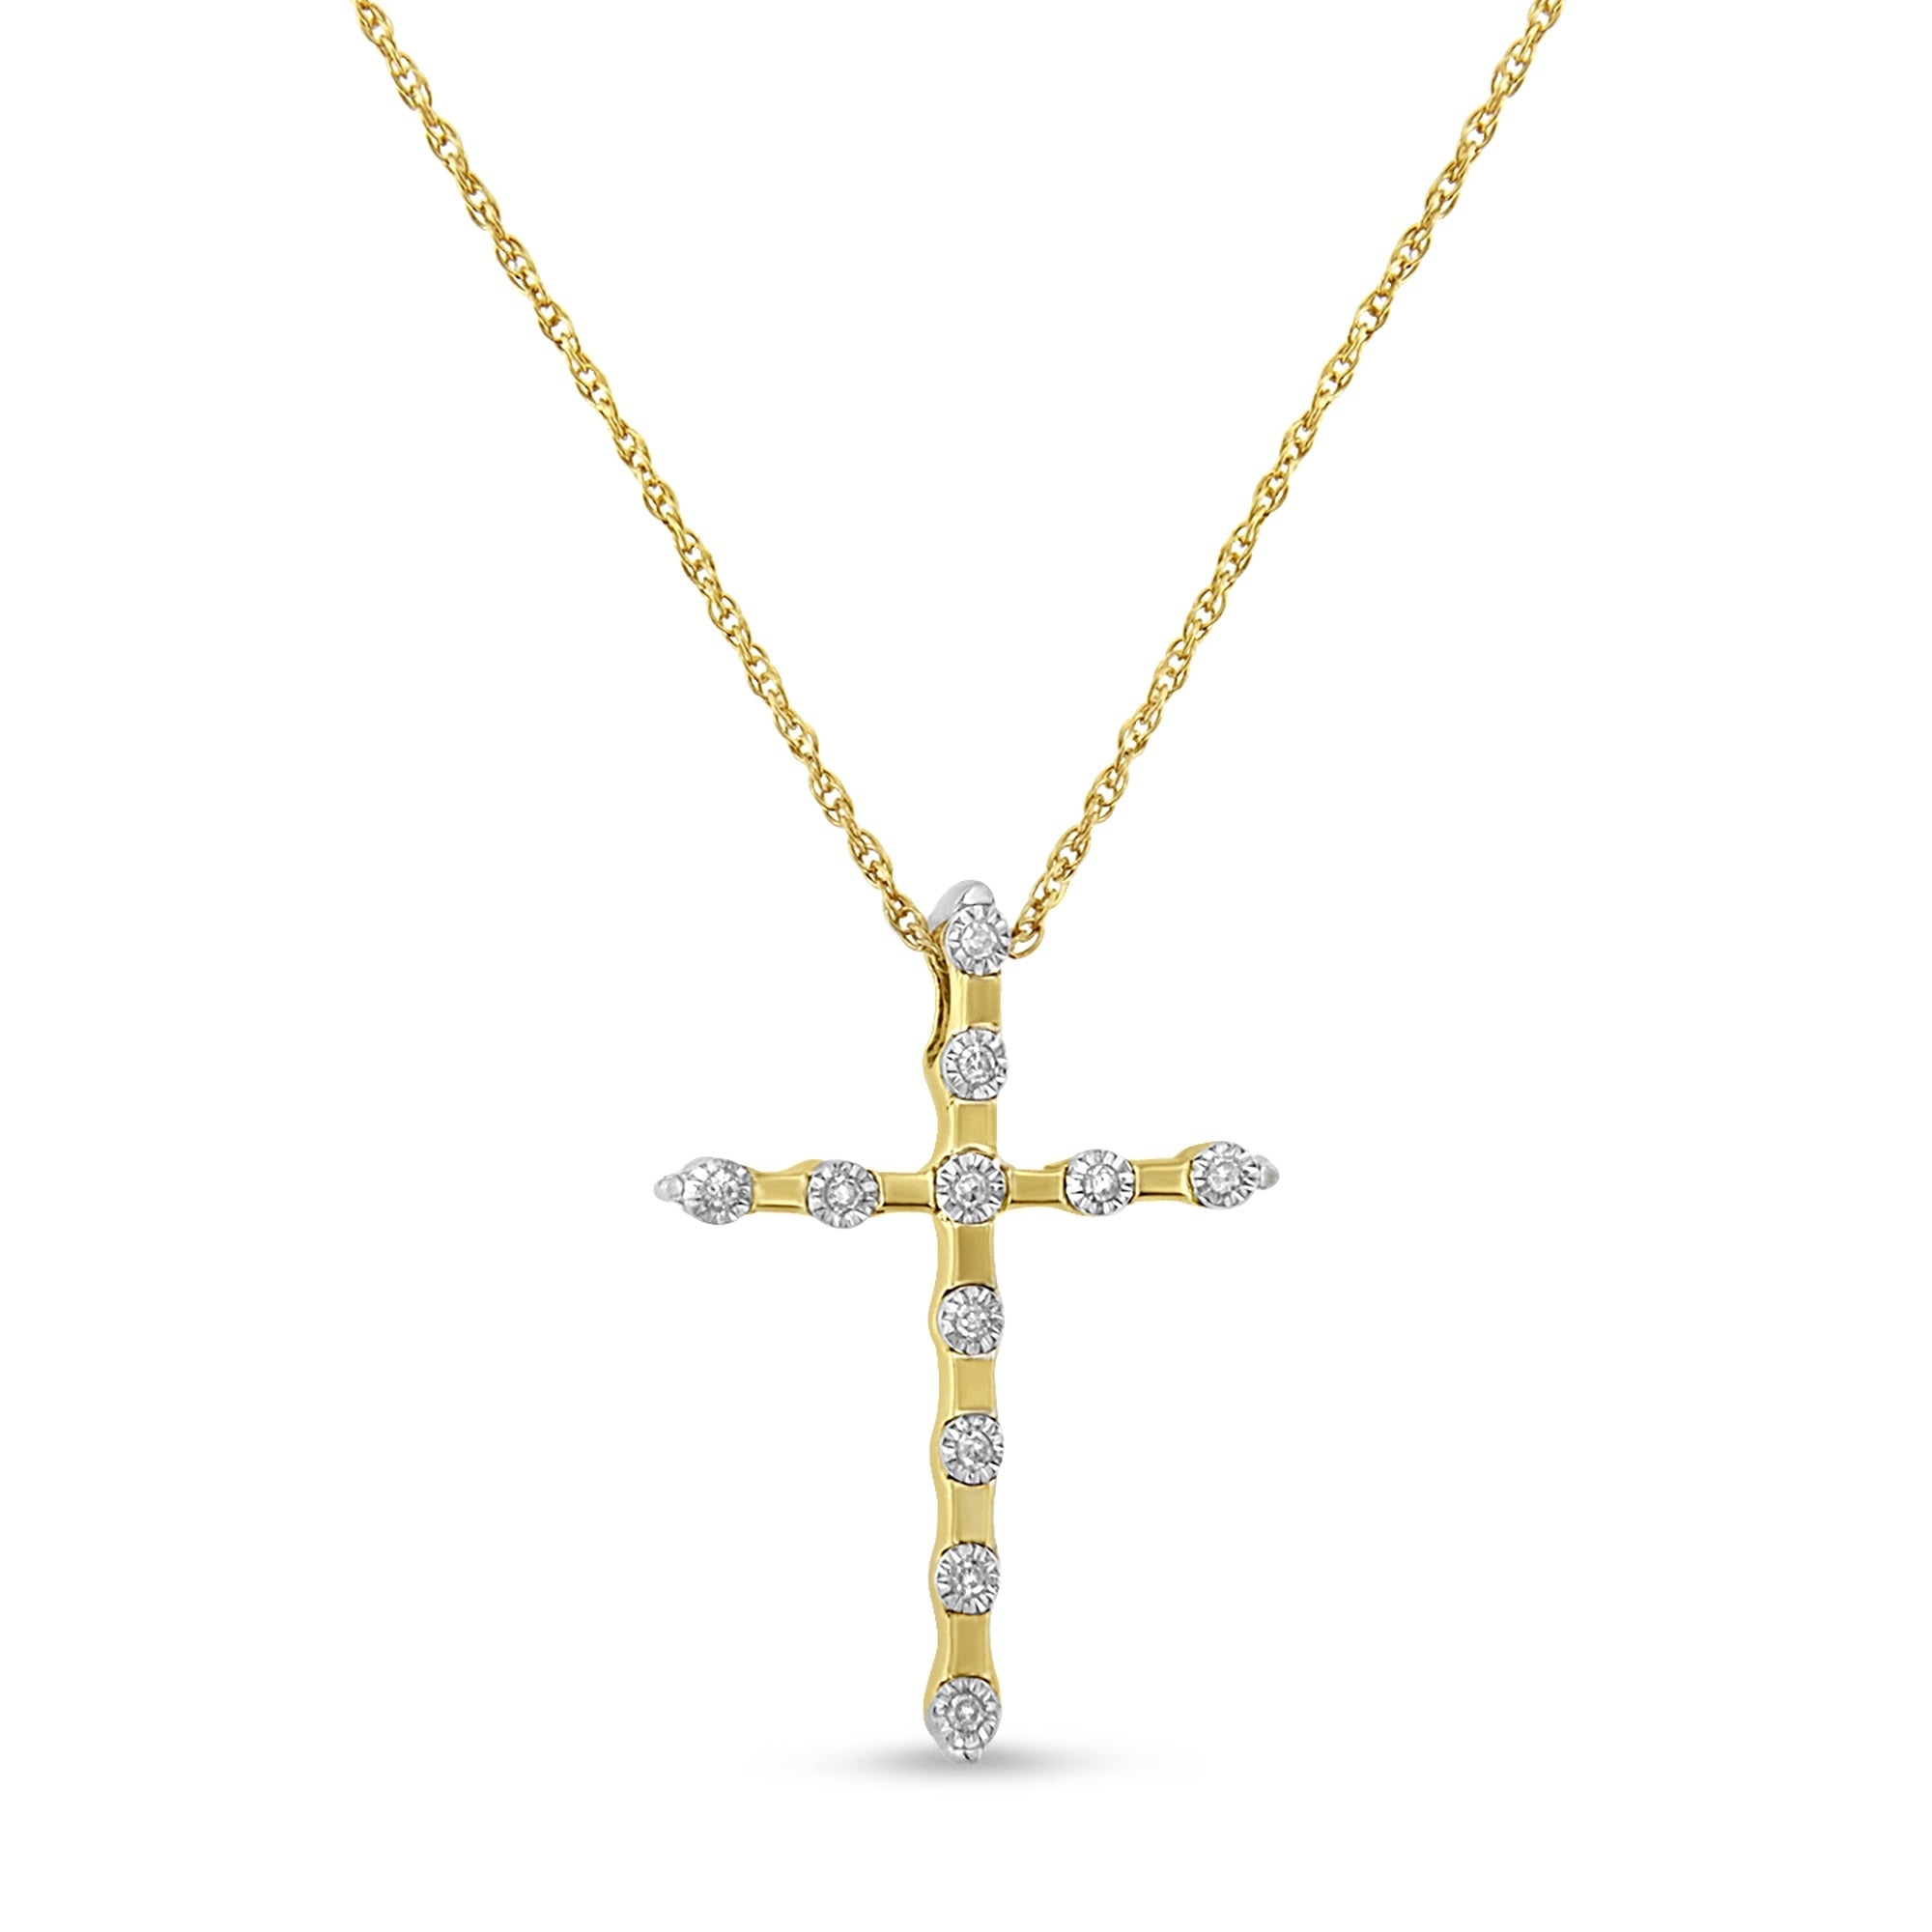 14K Yellow Gold Plated .925 Sterling Silver Miracle Set Diamond Accent Cross 18" Pendant Necklace (H-I Color, I2 Clarity) - LinkagejewelrydesignLinkagejewelrydesign